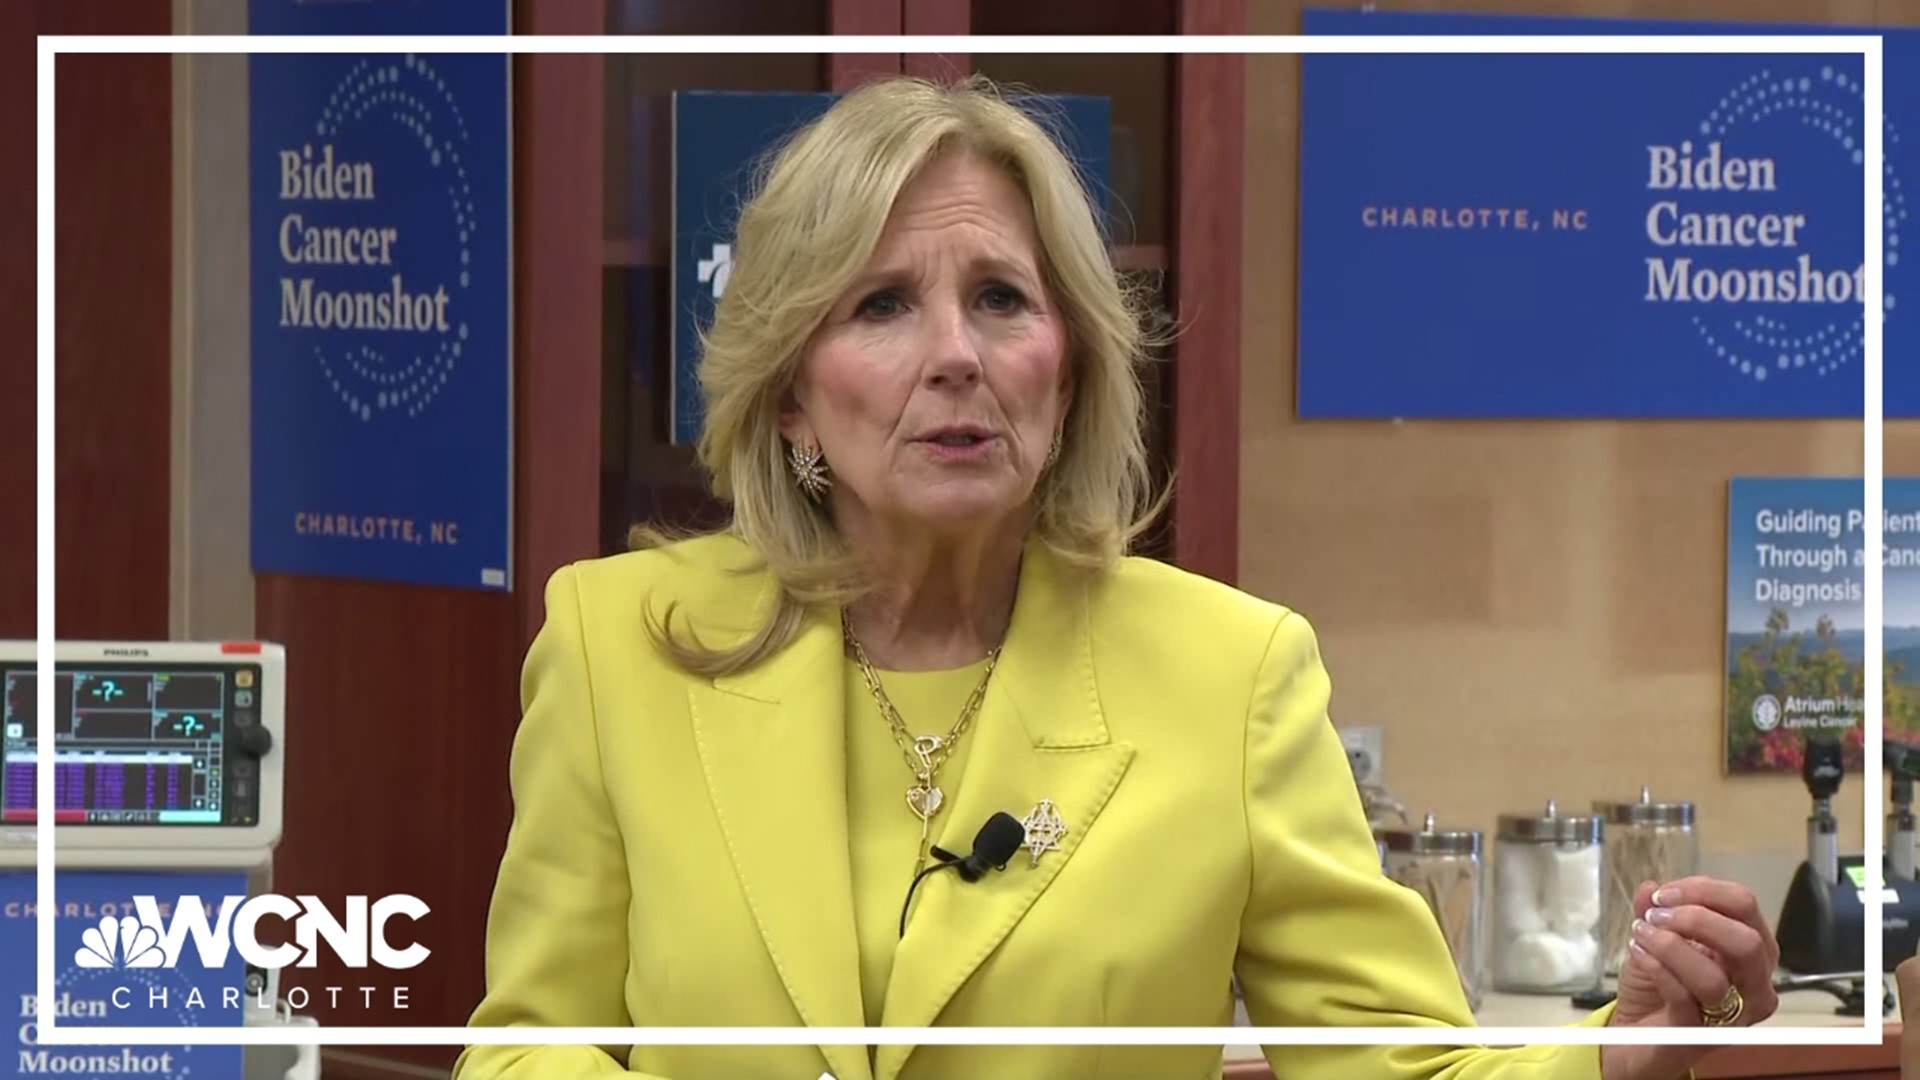 Jill Biden's stop in Charlotte was a chance to discuss the Cancer Moonshot initiative.